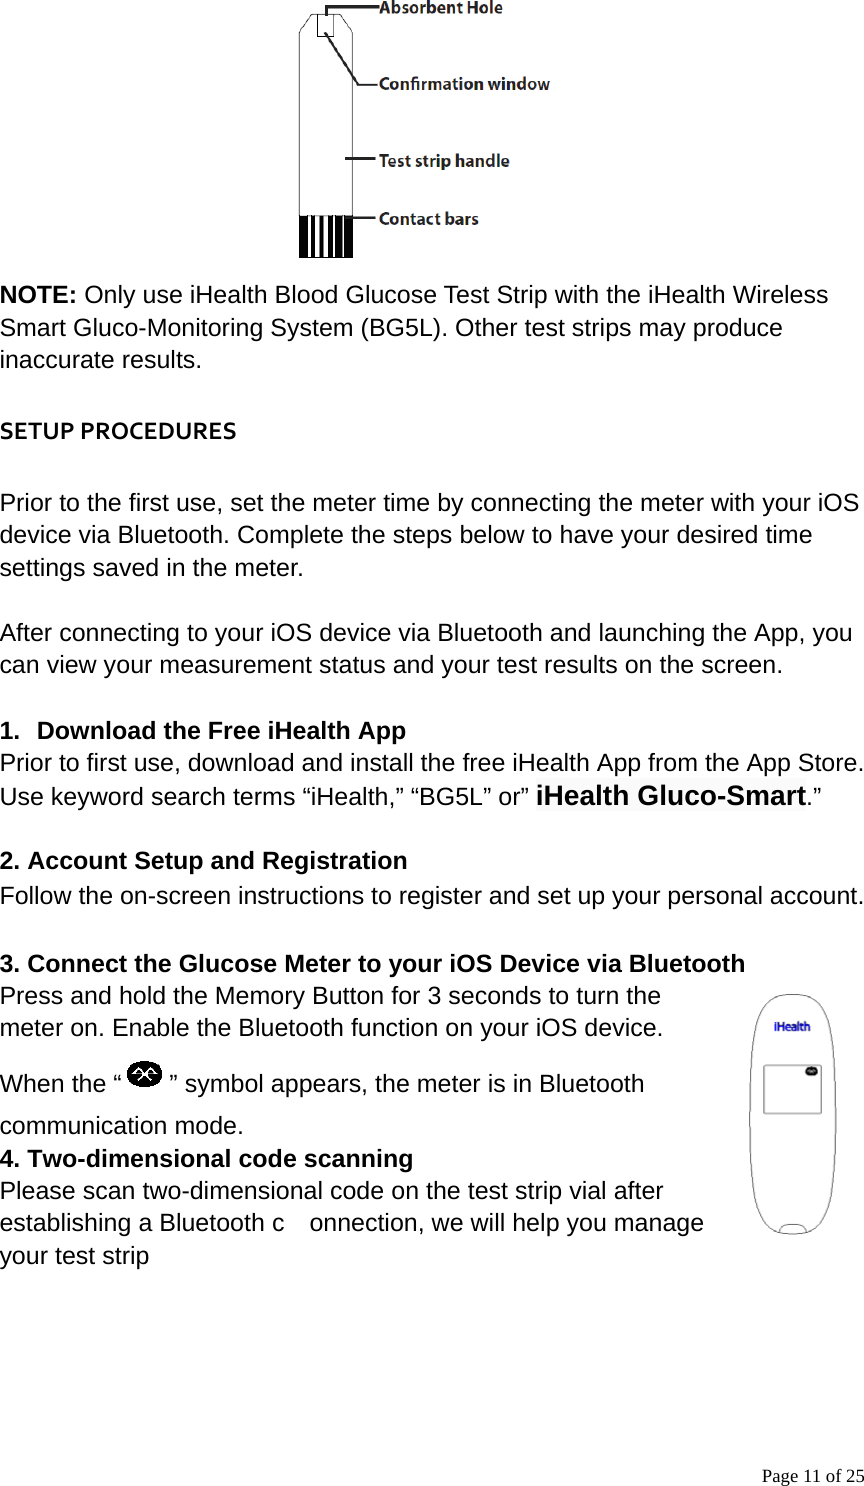 Page 11 of 25 NOTE: Only use iHealth Blood Glucose Test Strip with the iHealth Wireless Smart Gluco-Monitoring System (BG5L). Other test strips may produce inaccurate results.   SETUPPROCEDURESPrior to the first use, set the meter time by connecting the meter with your iOS device via Bluetooth. Complete the steps below to have your desired time settings saved in the meter.  After connecting to your iOS device via Bluetooth and launching the App, you can view your measurement status and your test results on the screen.      1.  Download the Free iHealth App Prior to first use, download and install the free iHealth App from the App Store. Use keyword search terms “iHealth,” “BG5L” or” iHealth Gluco-Smart.”   2. Account Setup and Registration Follow the on-screen instructions to register and set up your personal account.  3. Connect the Glucose Meter to your iOS Device via Bluetooth Press and hold the Memory Button for 3 seconds to turn the meter on. Enable the Bluetooth function on your iOS device. When the “ ” symbol appears, the meter is in Bluetooth communication mode.    4. Two-dimensional code scanning Please scan two-dimensional code on the test strip vial after establishing a Bluetooth c    onnection, we will help you manage your test strip 